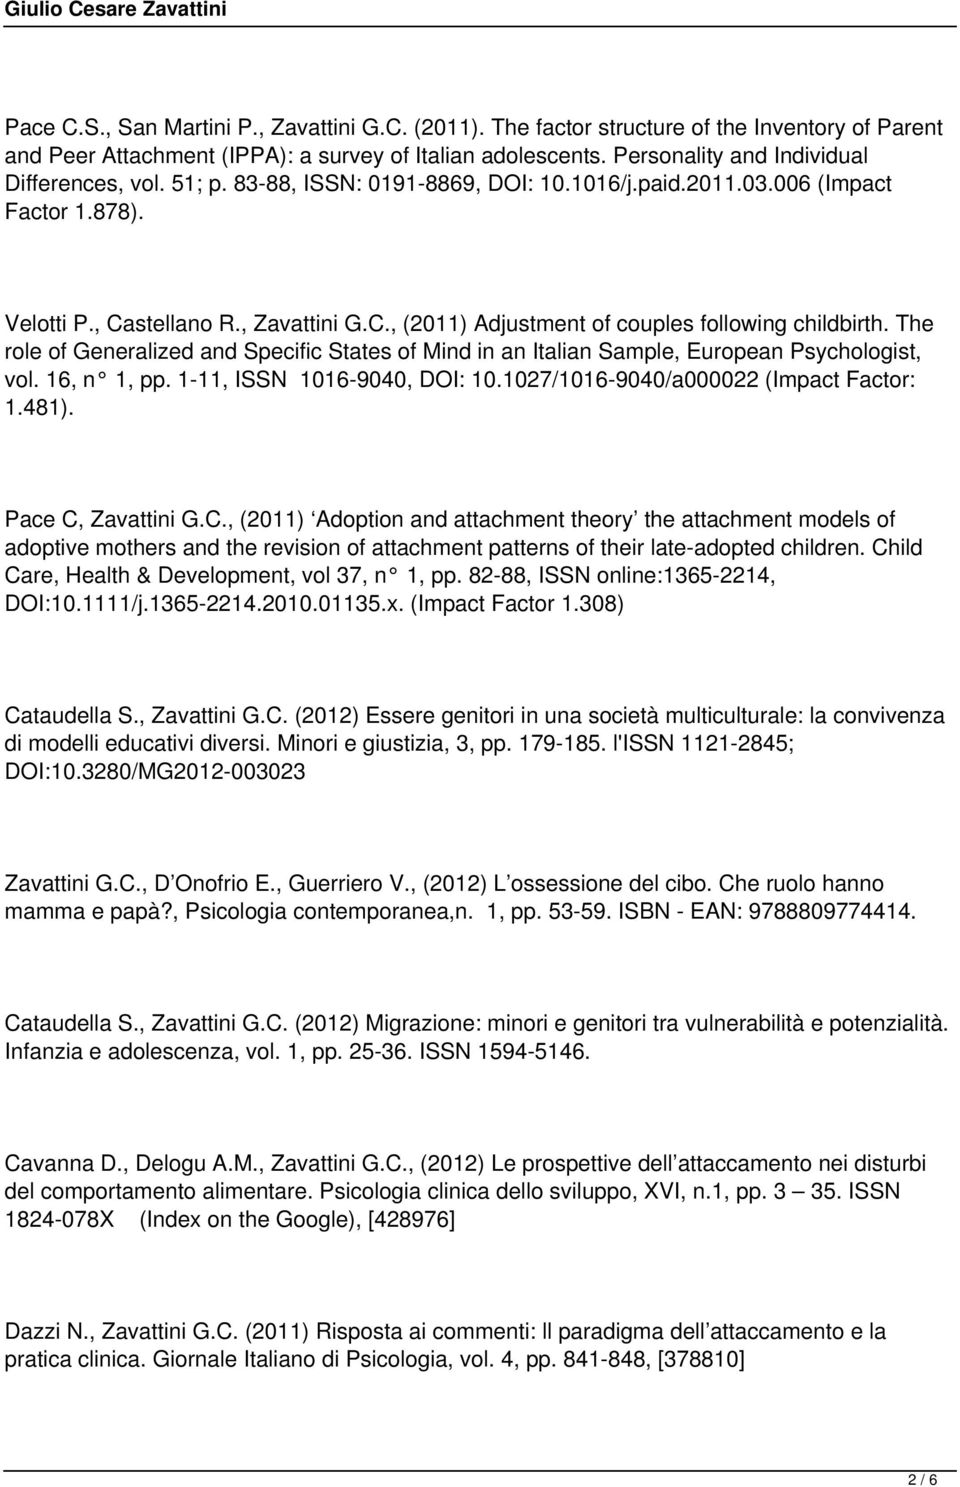 The role of Generalized and Specific States of Mind in an Italian Sample, European Psychologist, vol. 16, n 1, pp. 1-11, ISSN 1016-9040, DOI: 10.1027/1016-9040/a000022 (Impact Factor: 1.481).